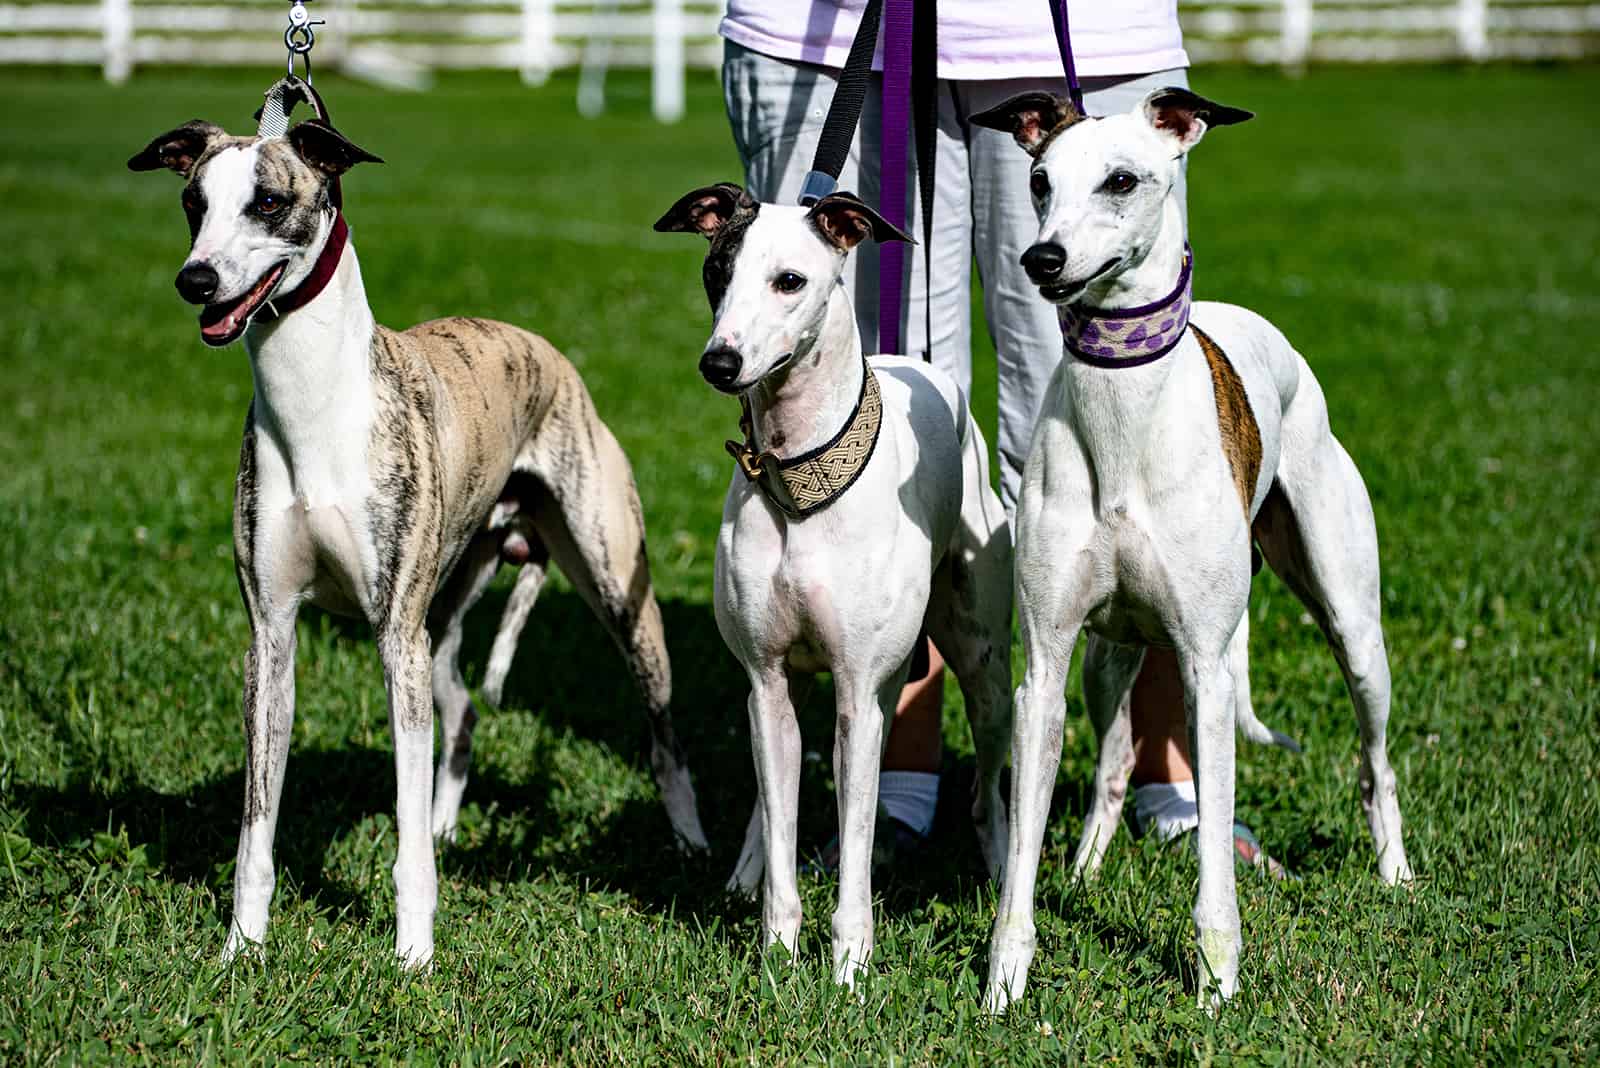 Three whippet dogs standing on green grass with their owner